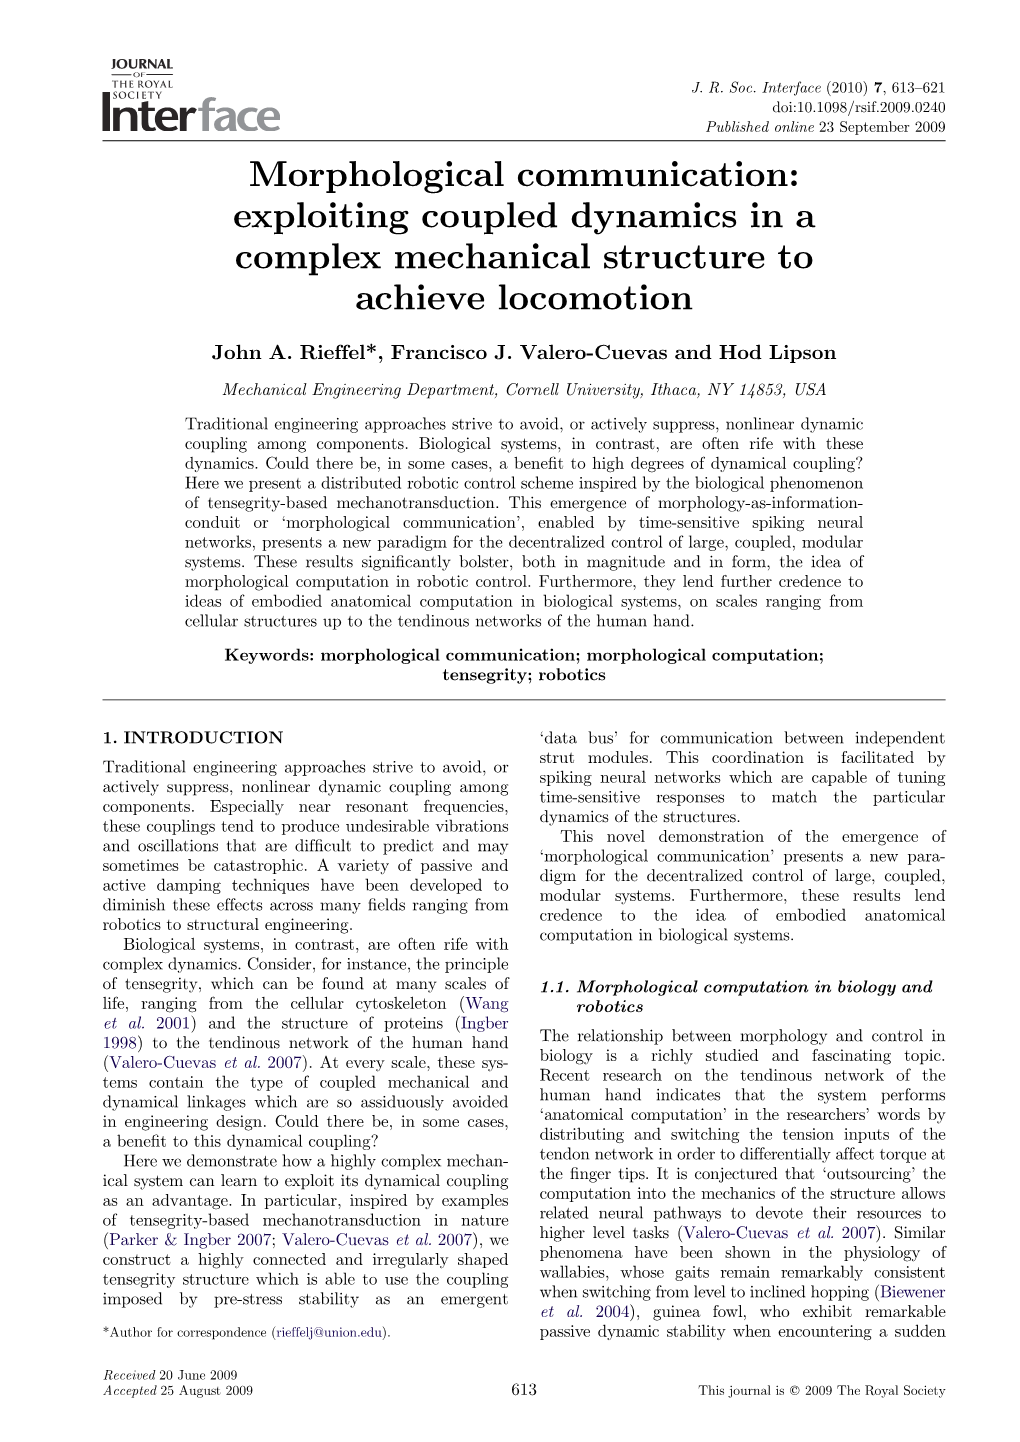 Exploiting Coupled Dynamics in a Complex Mechanical Structure to Achieve Locomotion